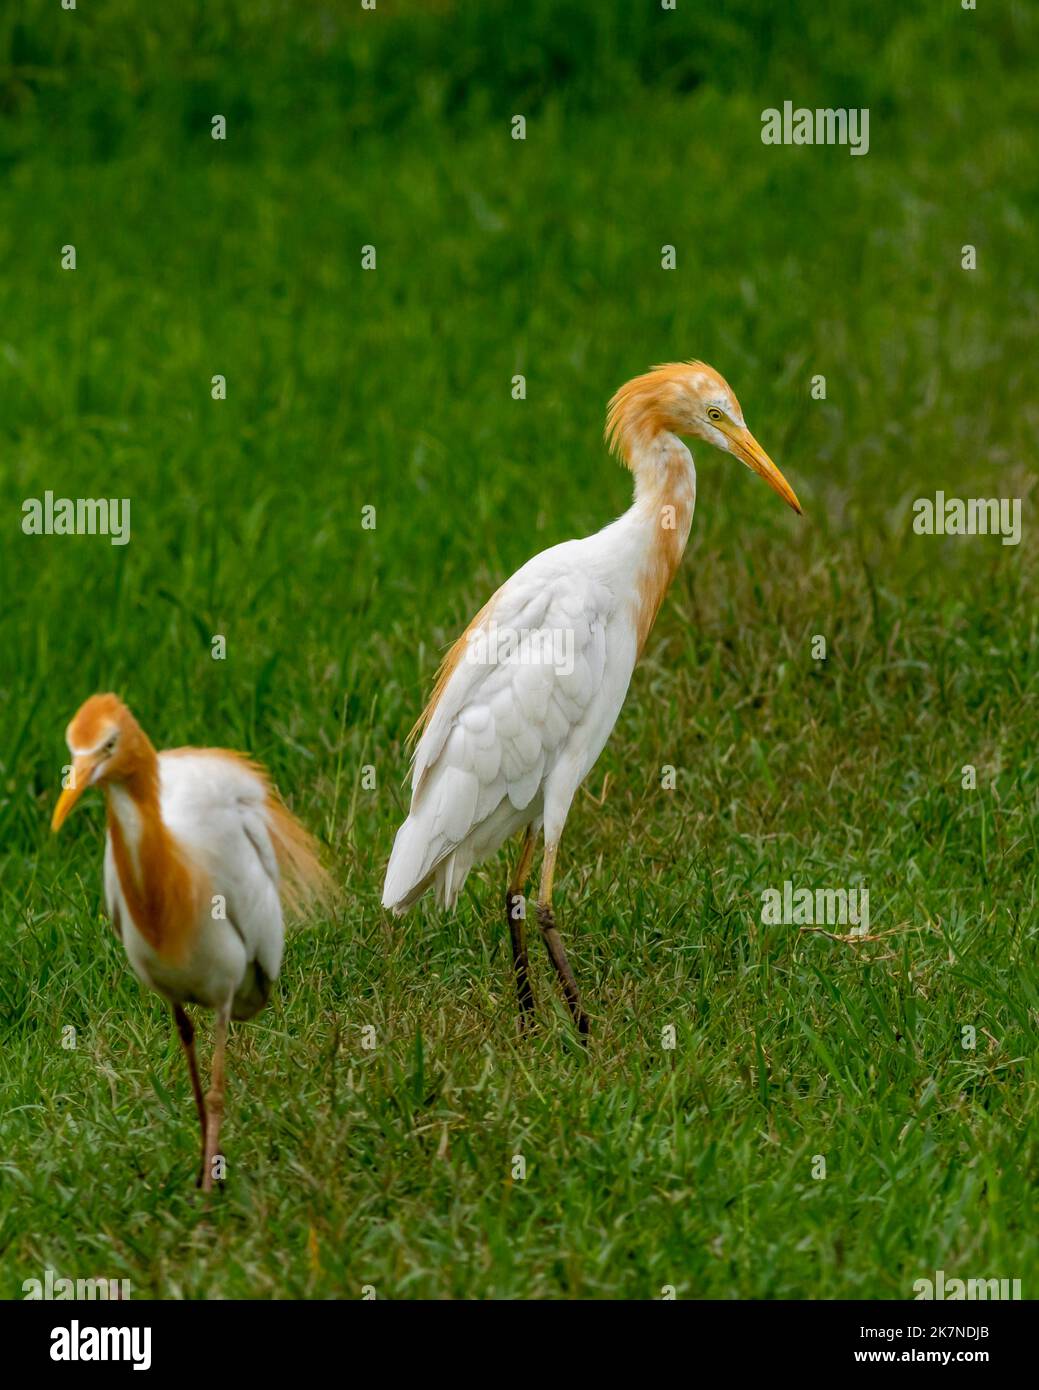 cattle egret or Bubulcus ibis in a breeding plumage in natural green background at keoladeo national park or bharatpur bird sanctuary rajasthan india Stock Photo